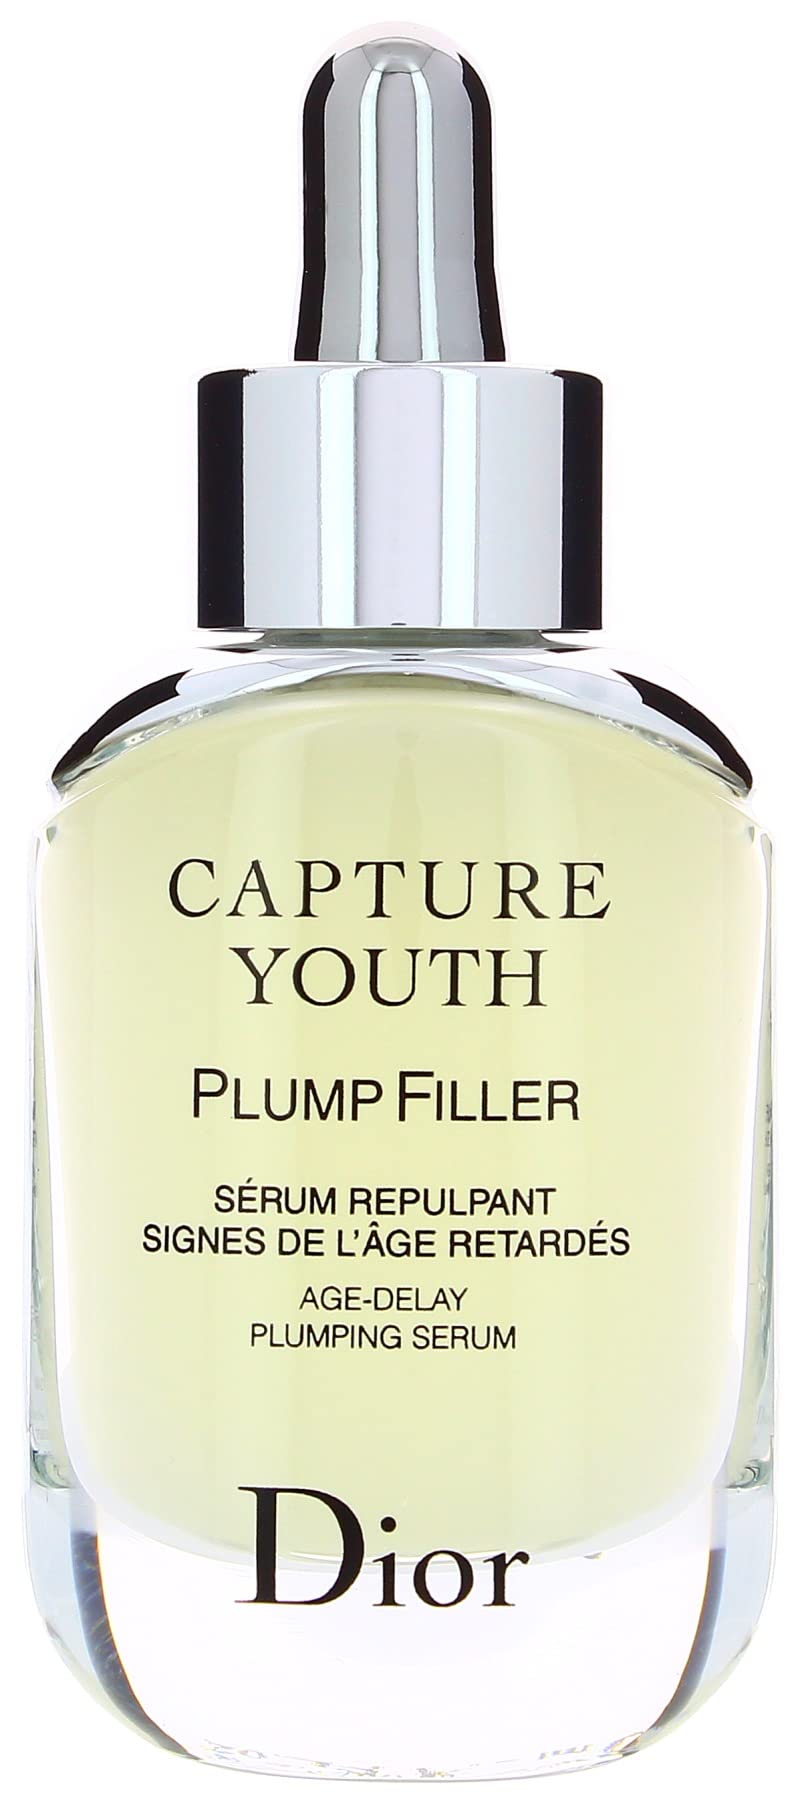 CAPTURE YOUTH INTENSE RESCUE AGEDELAY REVITALIZING OILSERUM  DIOR AE